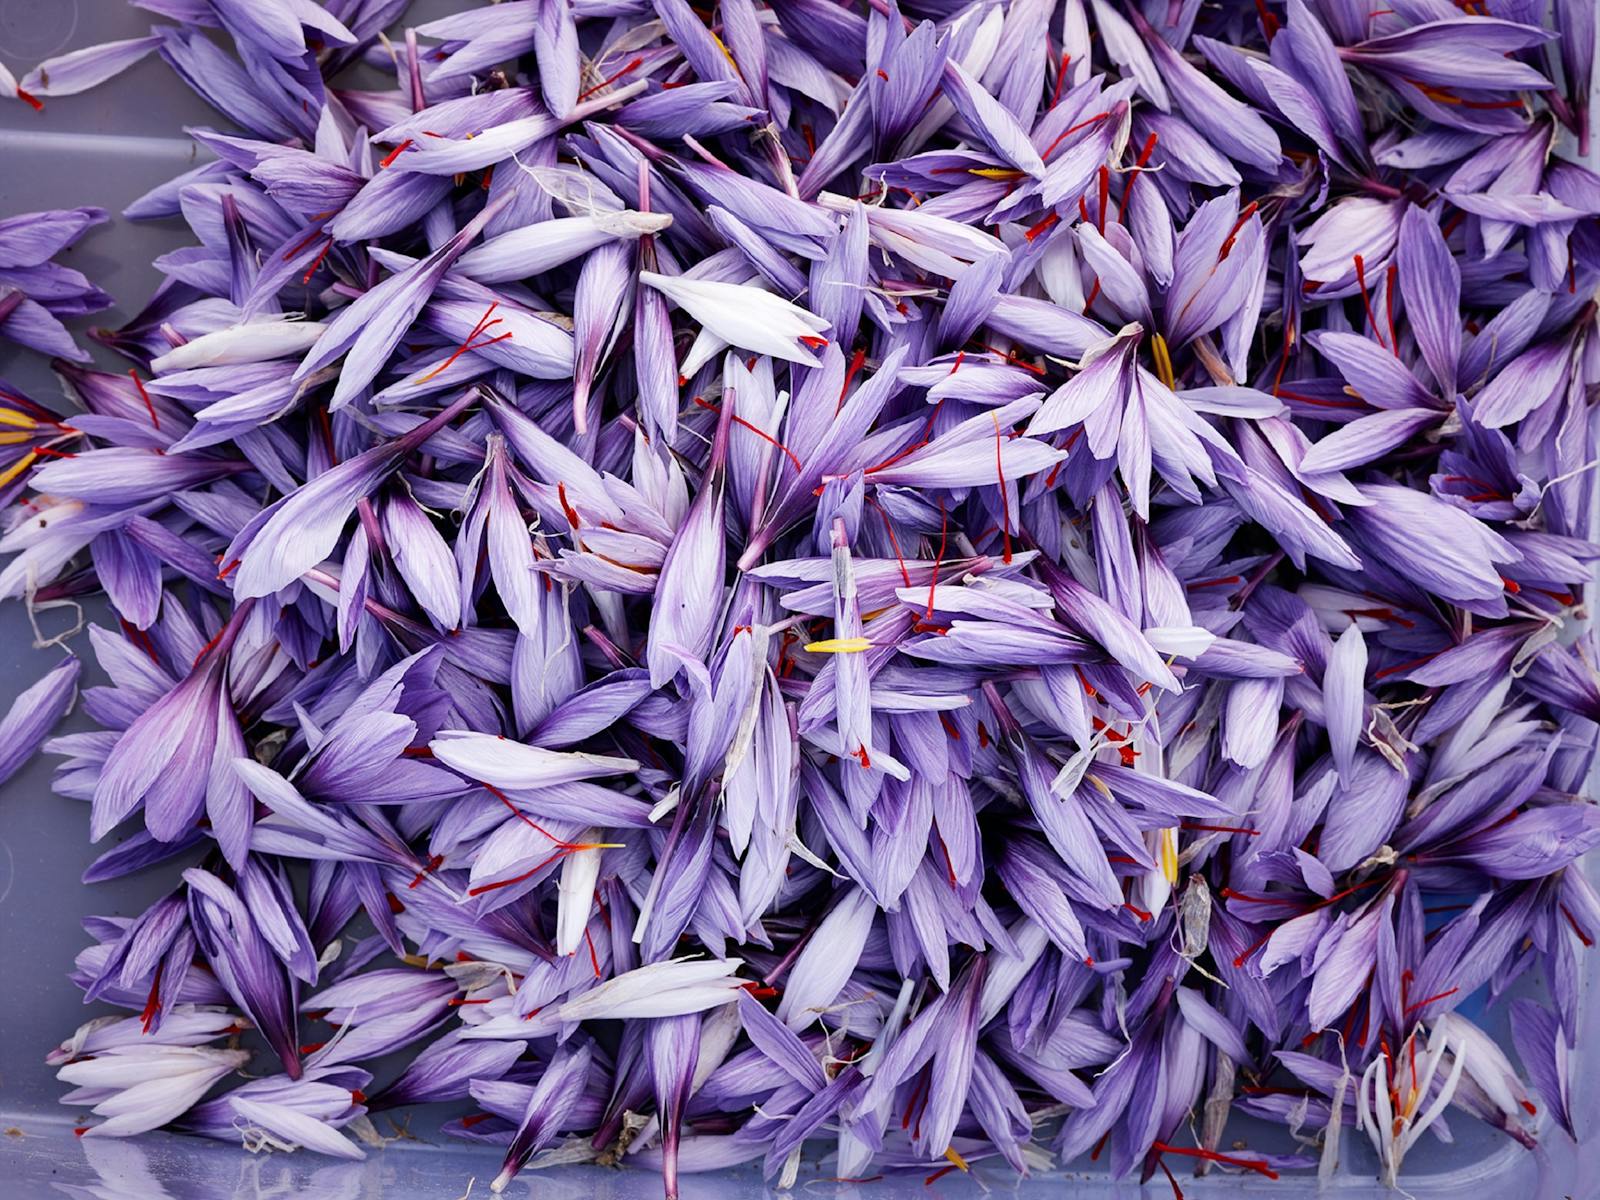 Lilac coloured saffron flowers after being picked early in the morning